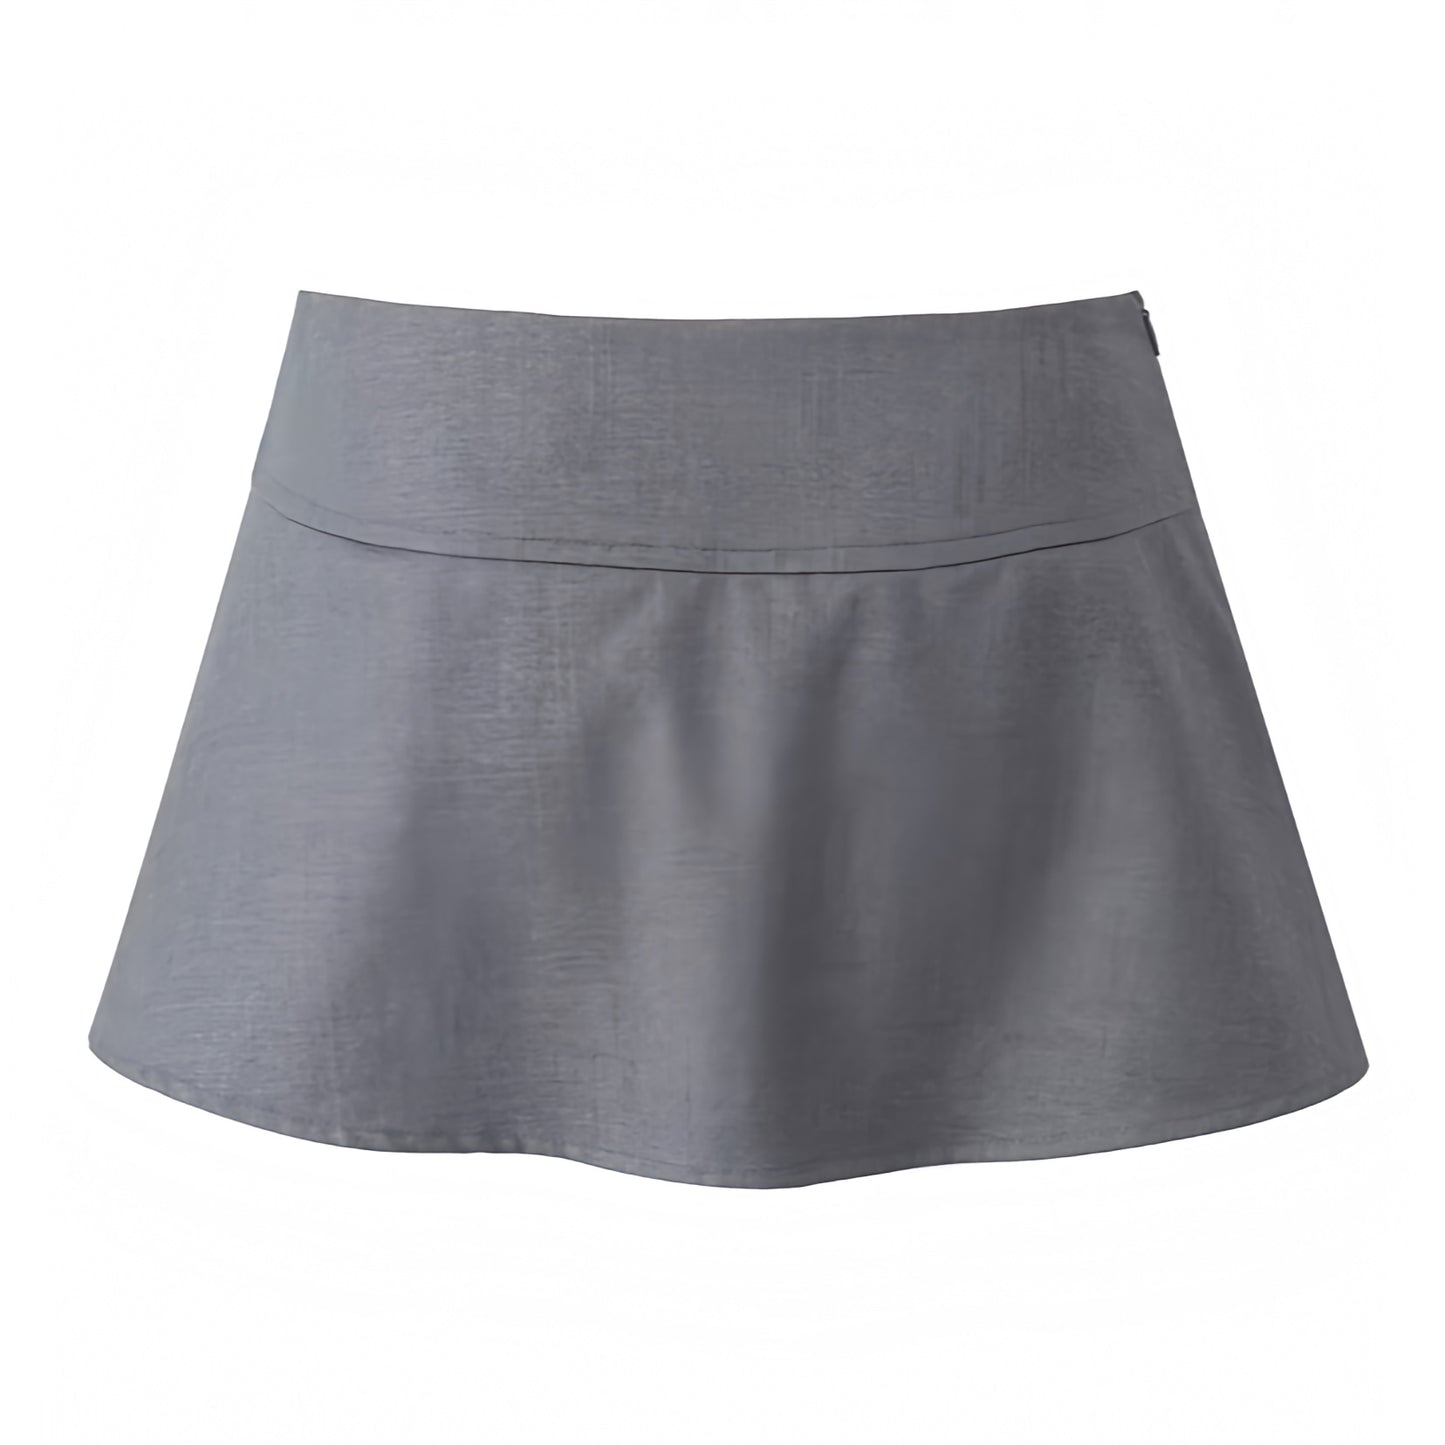 dark-grey-gray-slim-tight-fit-pleated-bow-mid-low-rise-waisted-fitted-waist-slit-short-mini-skirt-skort-with-shorts-women-ladies-chic-trendy-spring-2024-summer-casual-feminine-office-siren-90s-minimalist-coquette-blokette-preppy-school-academia-club-wear-night-out-sexy-party-korean-stockholm-style-zara-revolve-aritzia-brandy-melville-urban-outfitters